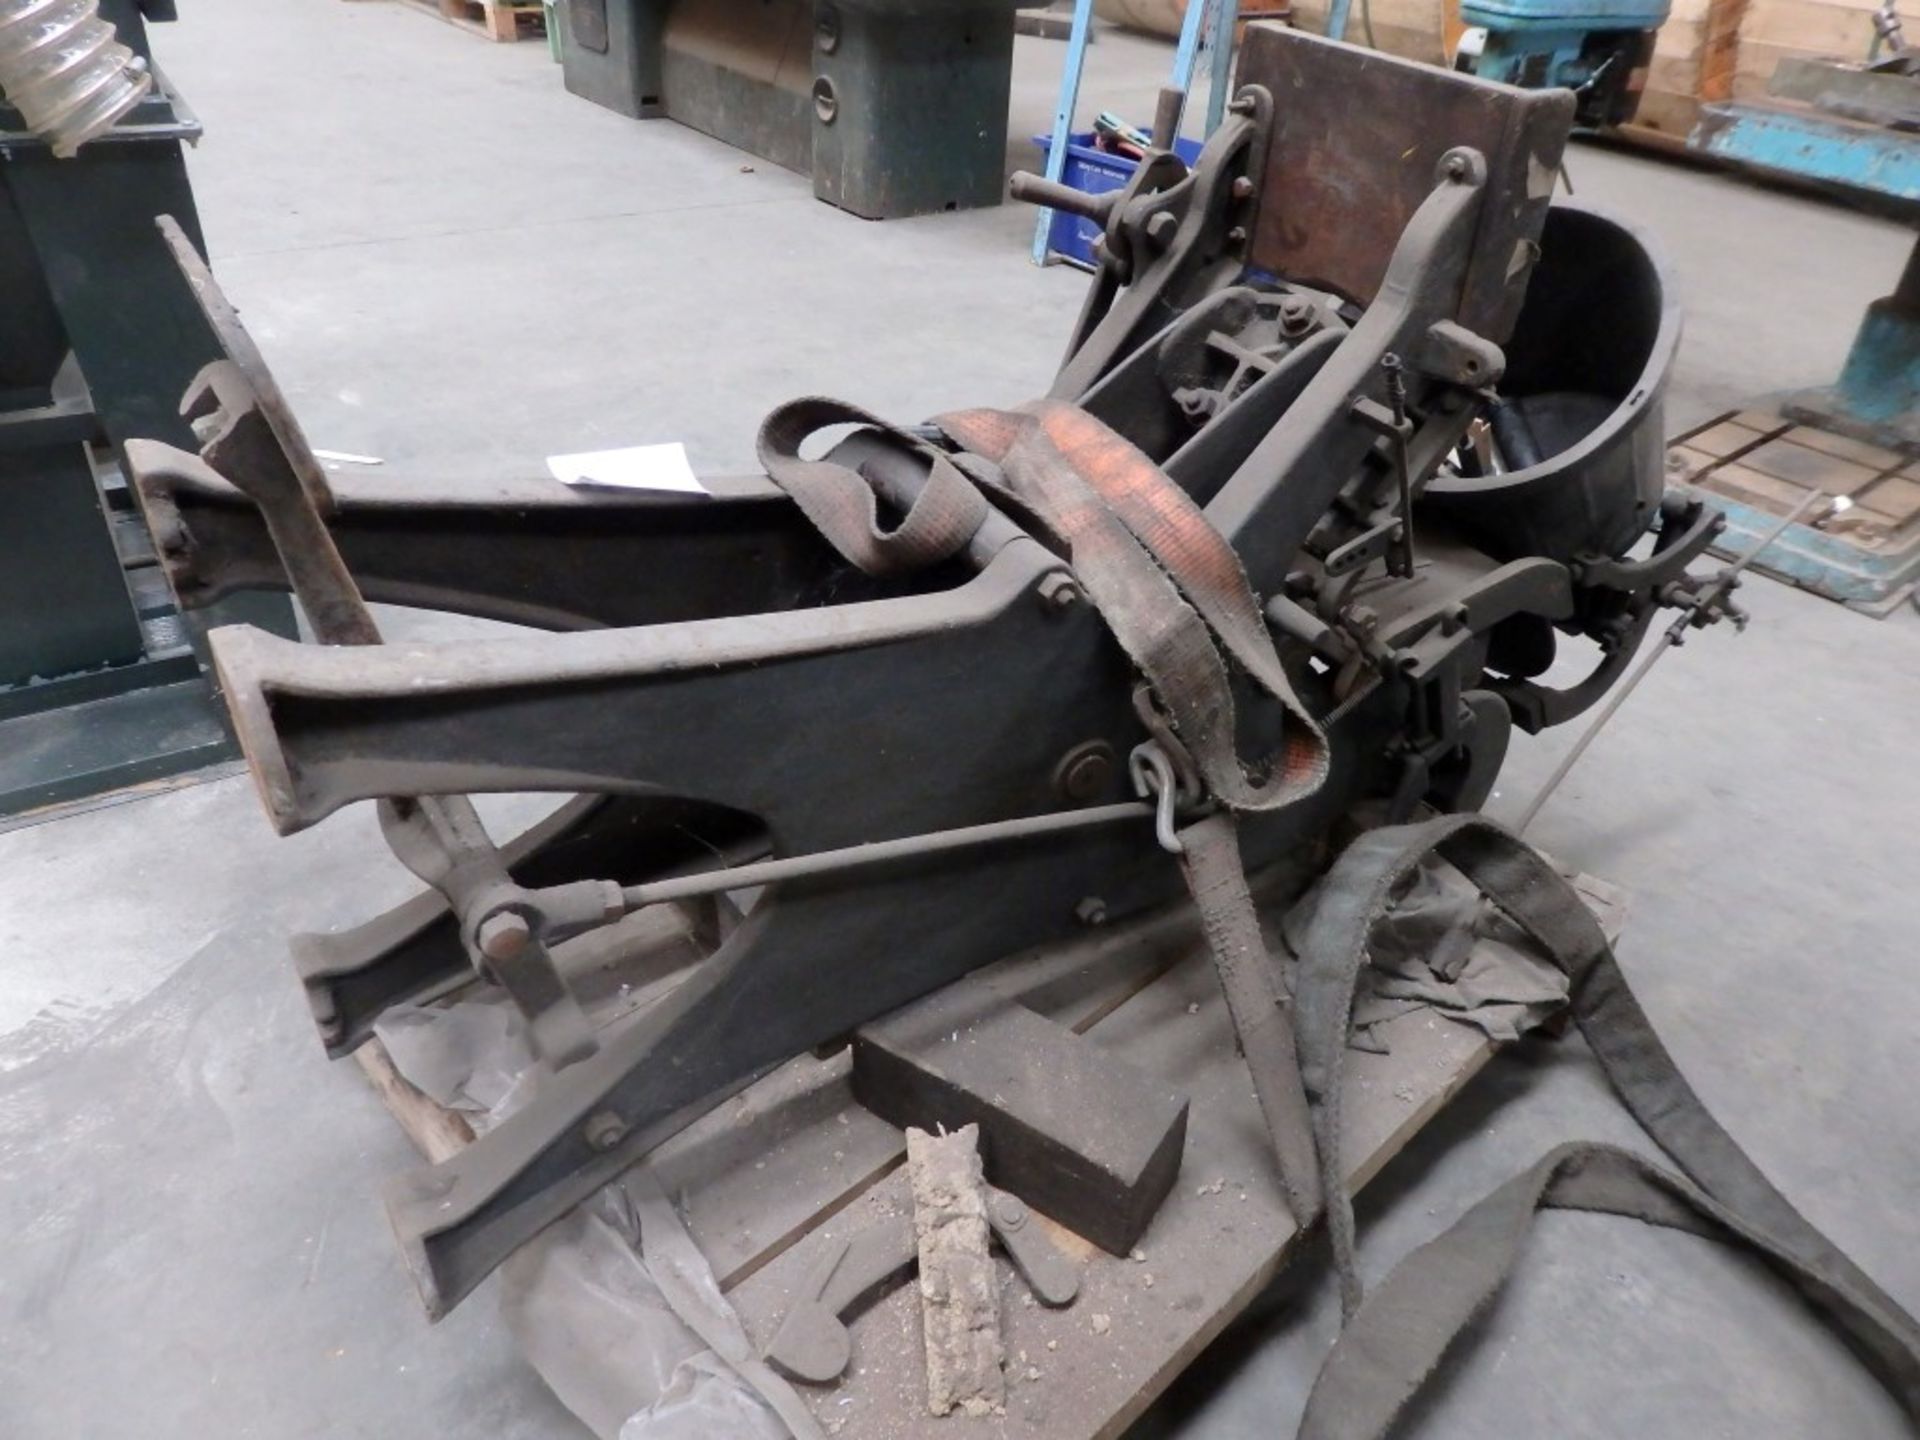 1 x Original Linotype Model 78 Printing Press - Untested In Good Aesthetic Condition - Fantastic - Image 11 of 23